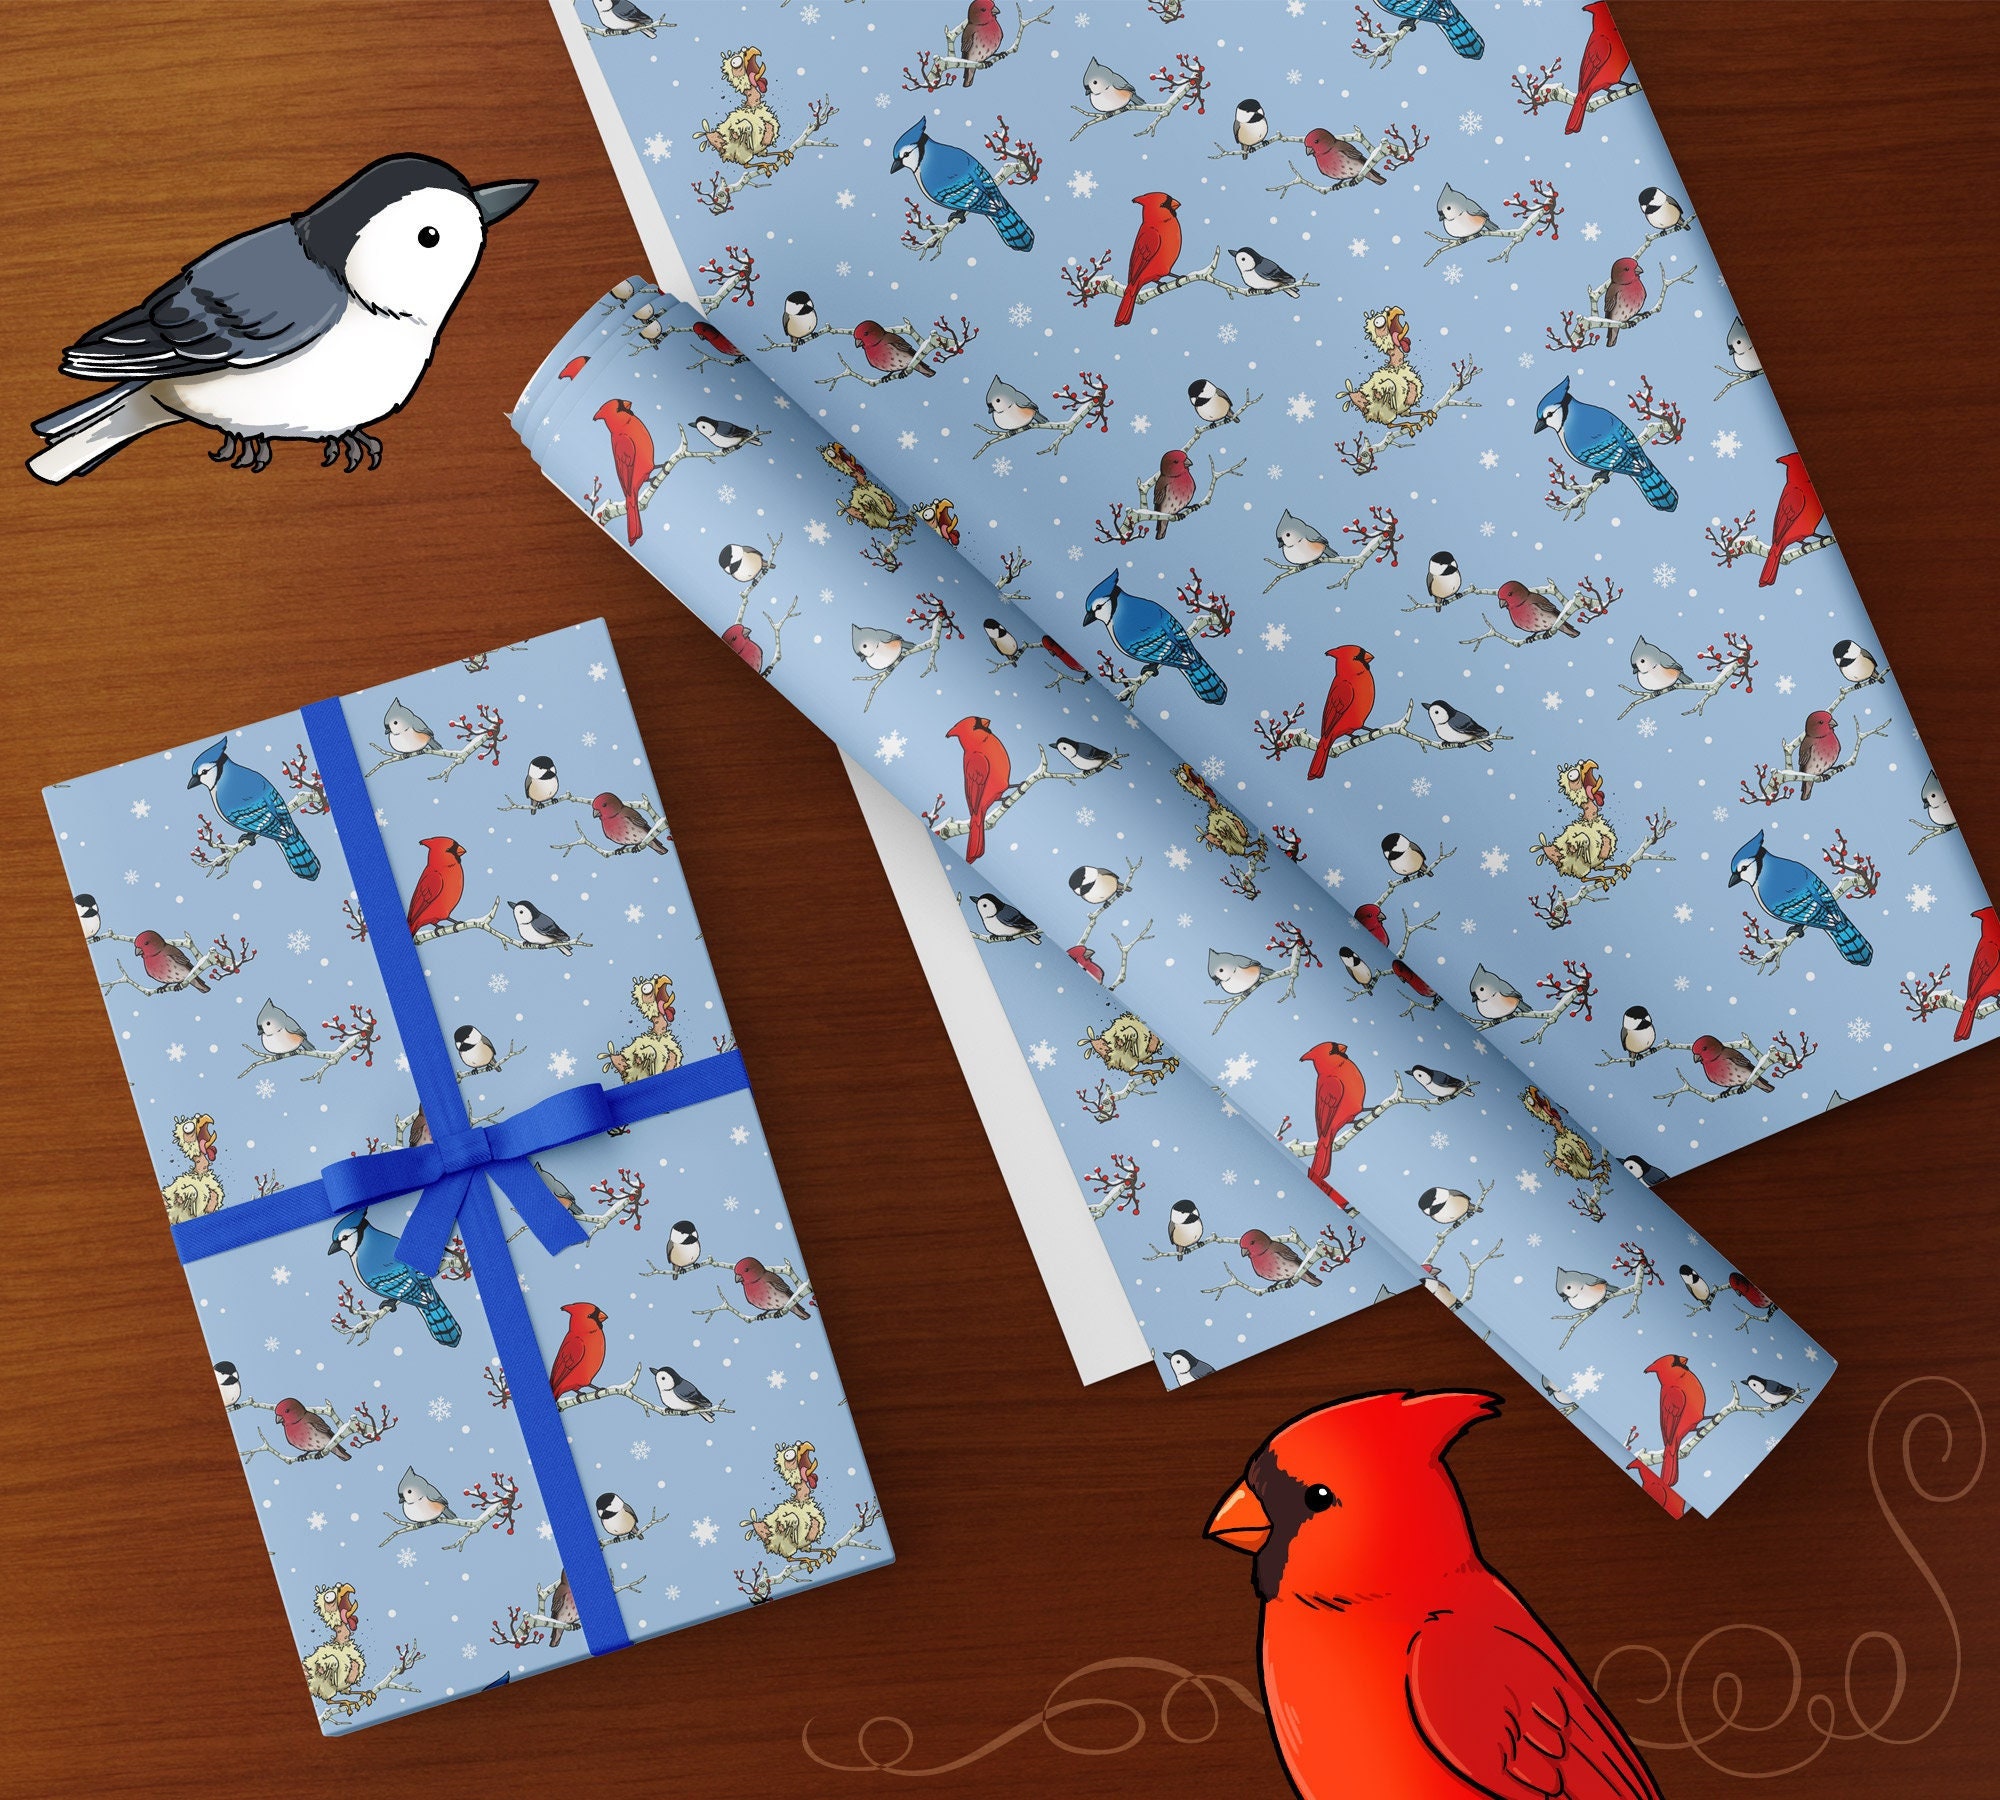 Farm Wrapping Paper Cow Wrapping Paper, Farm Animal Wrapping Paper